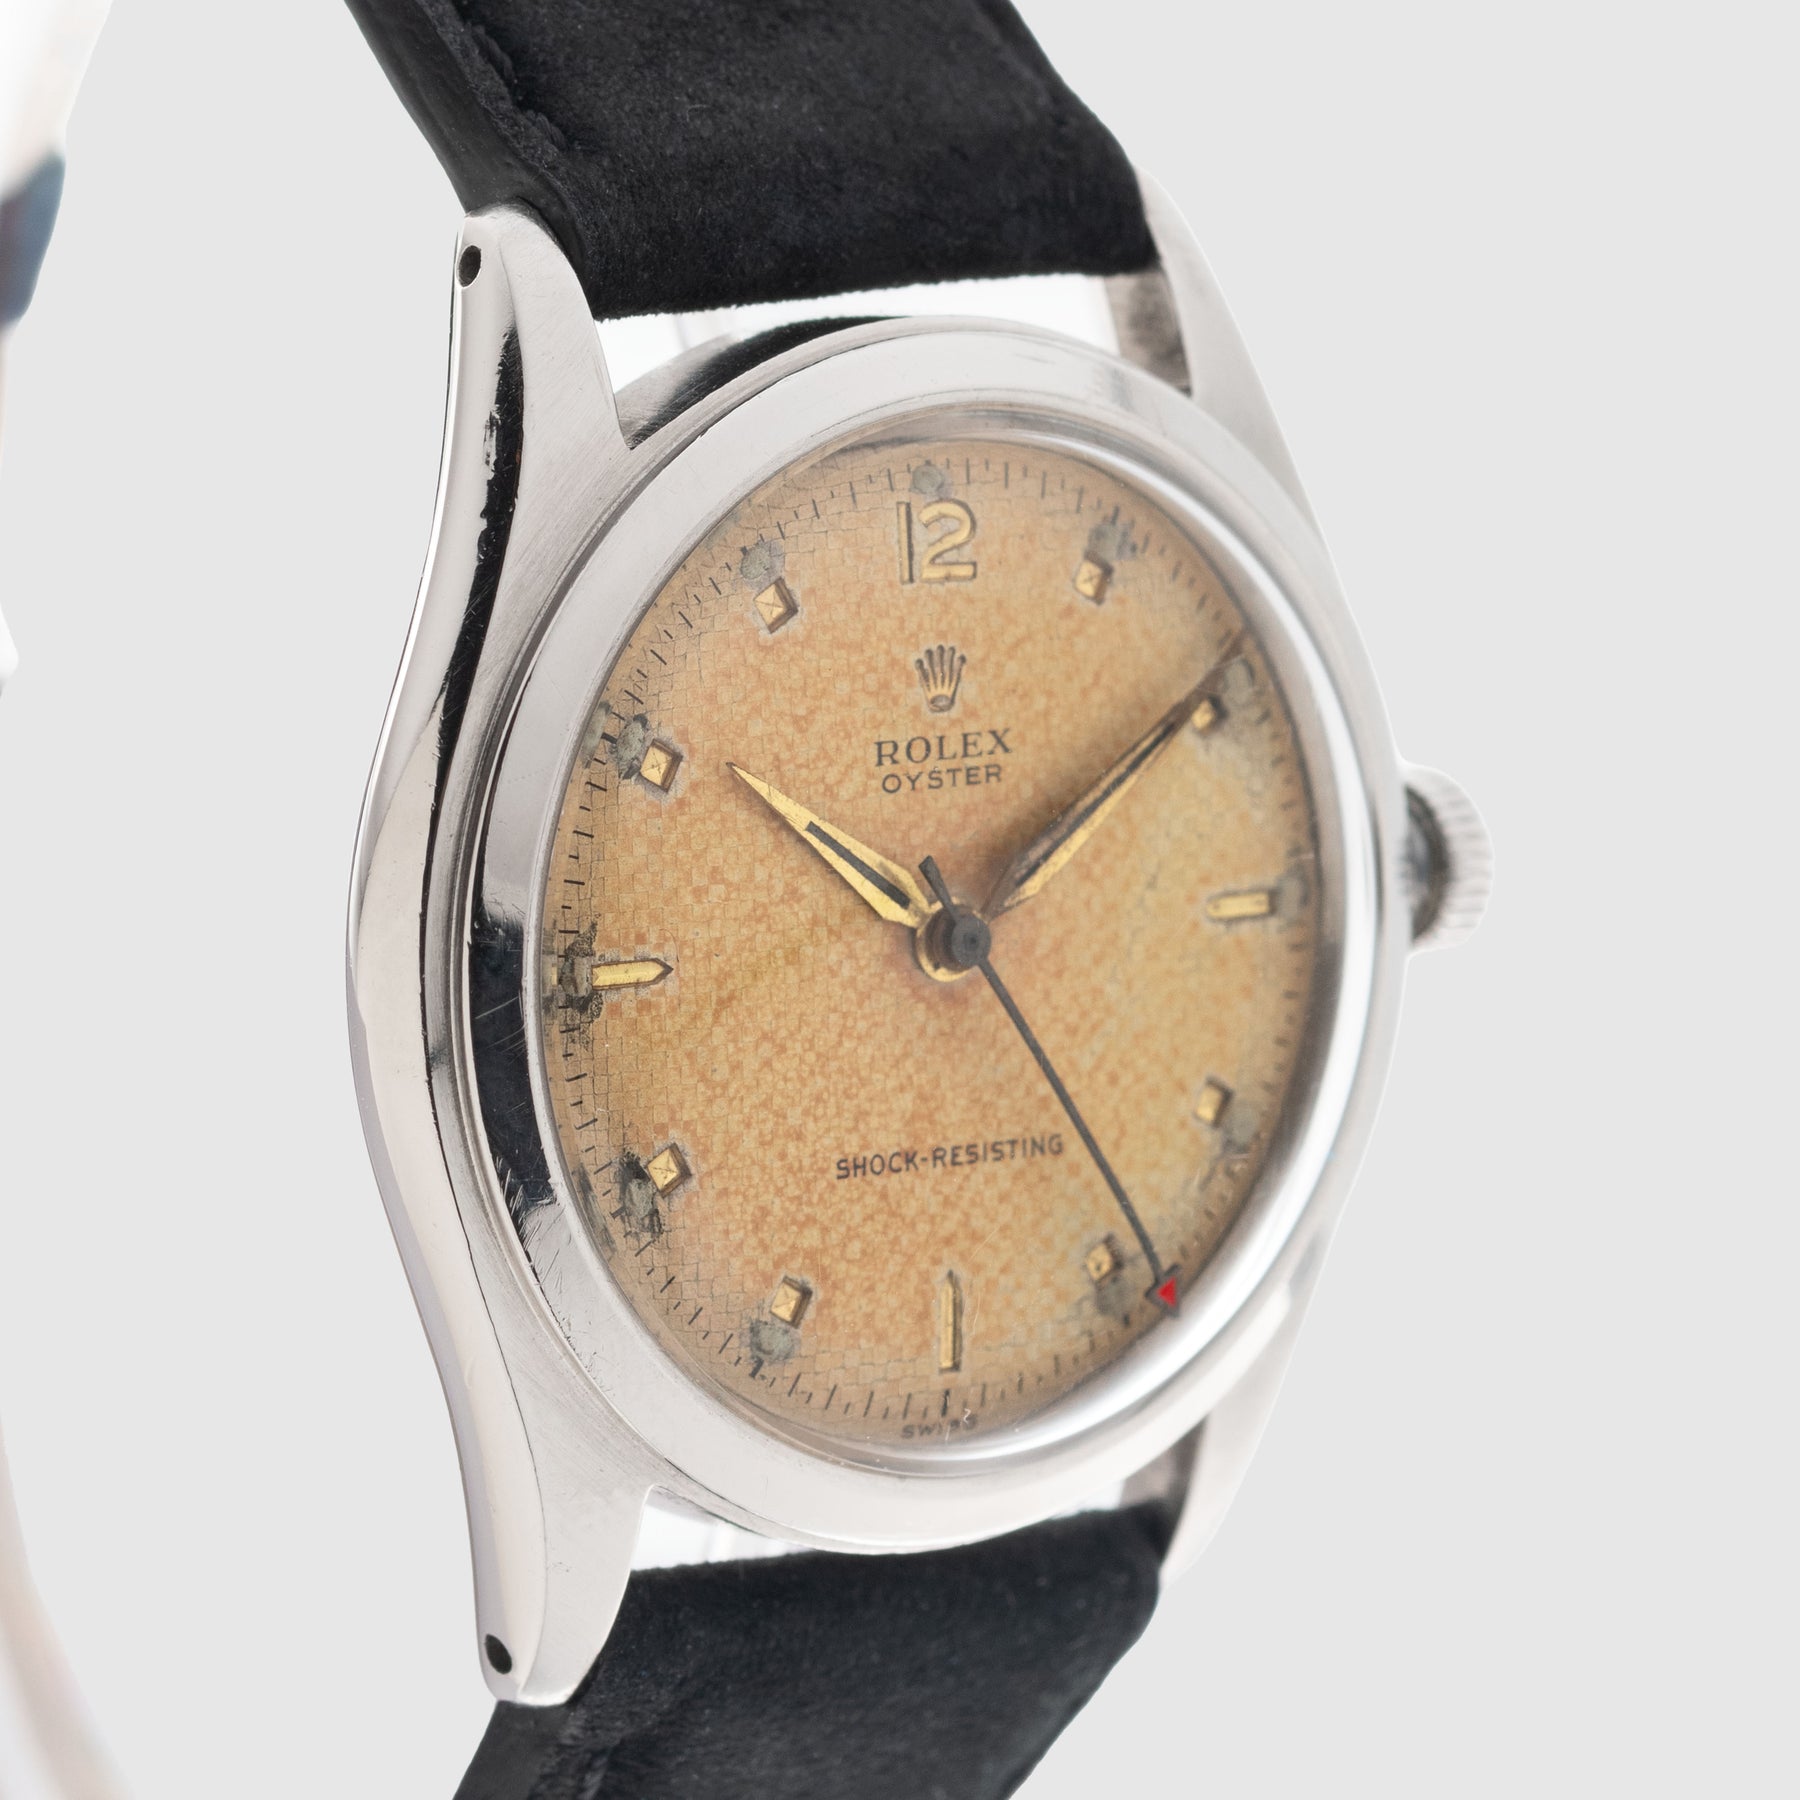 1945 Rolex Oyster Shock Resisting Waffle Dial Ref. 4499